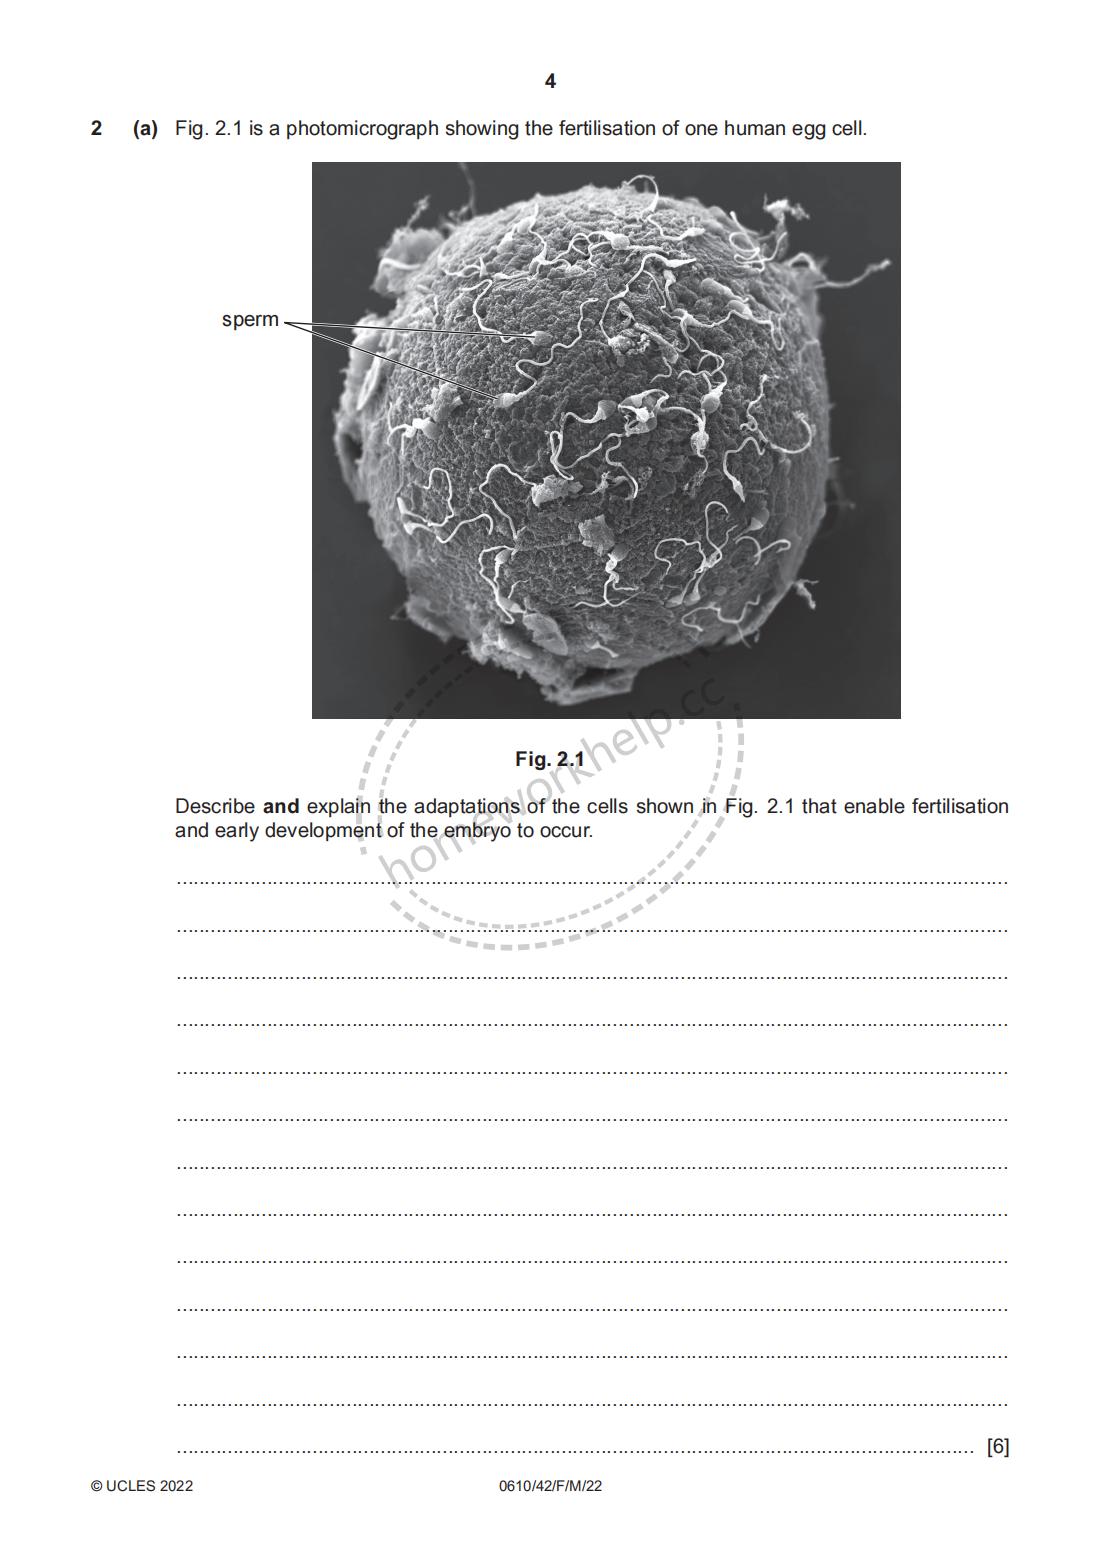 Question-2 Describe and explain the adaptations of the cells shown in Fig. 2.1 that enable fertilisa